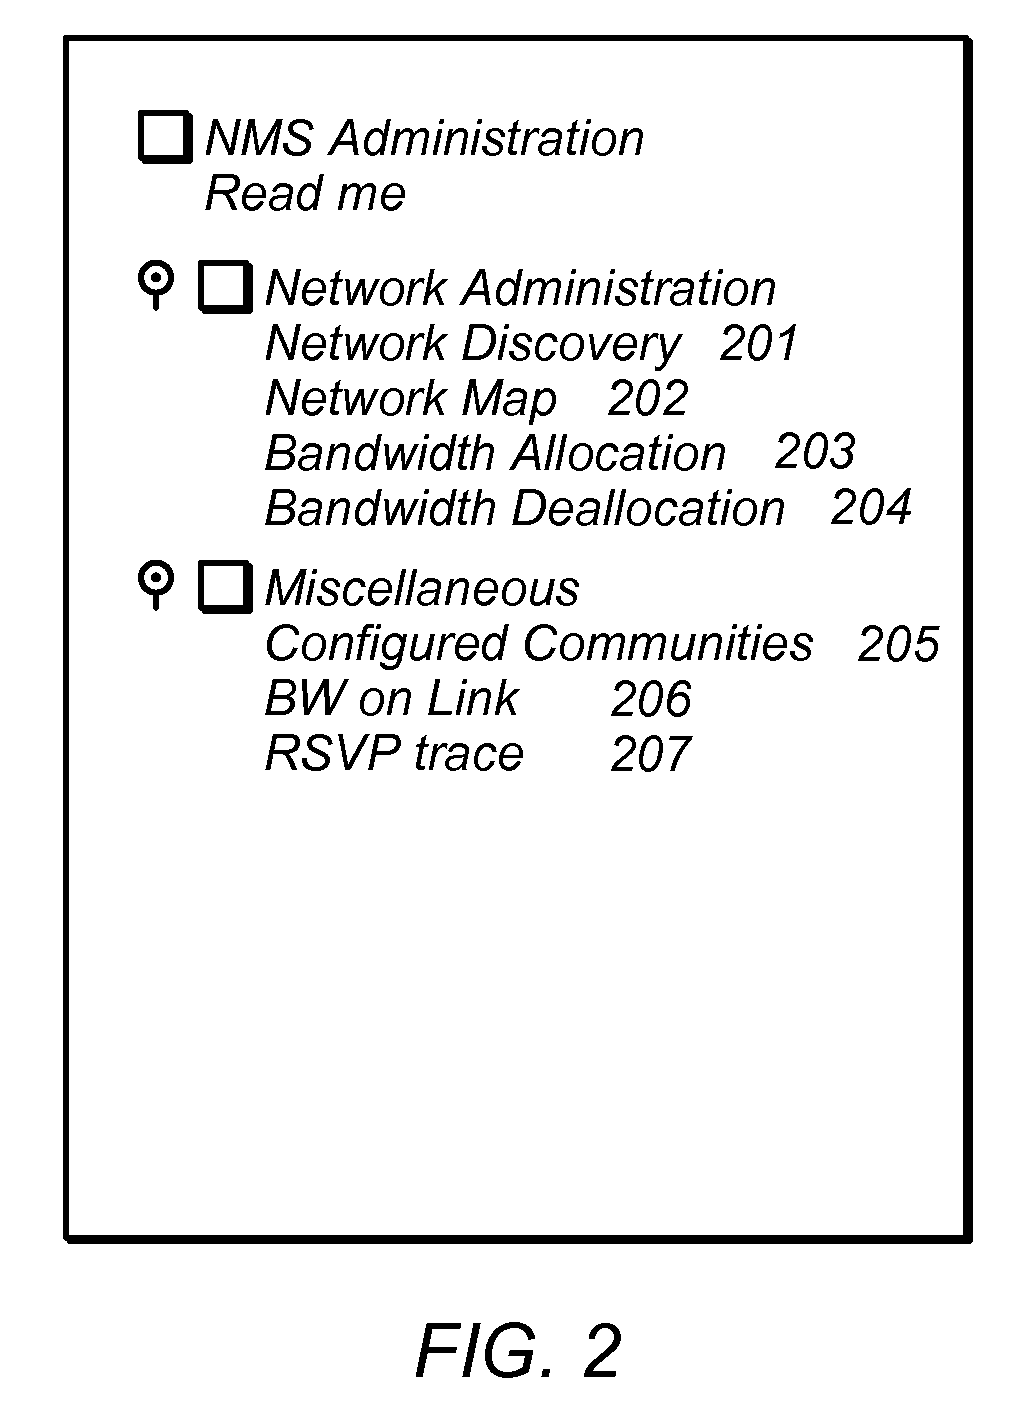 Graphical user interface (GUI) for administering a network implementing media aggregation